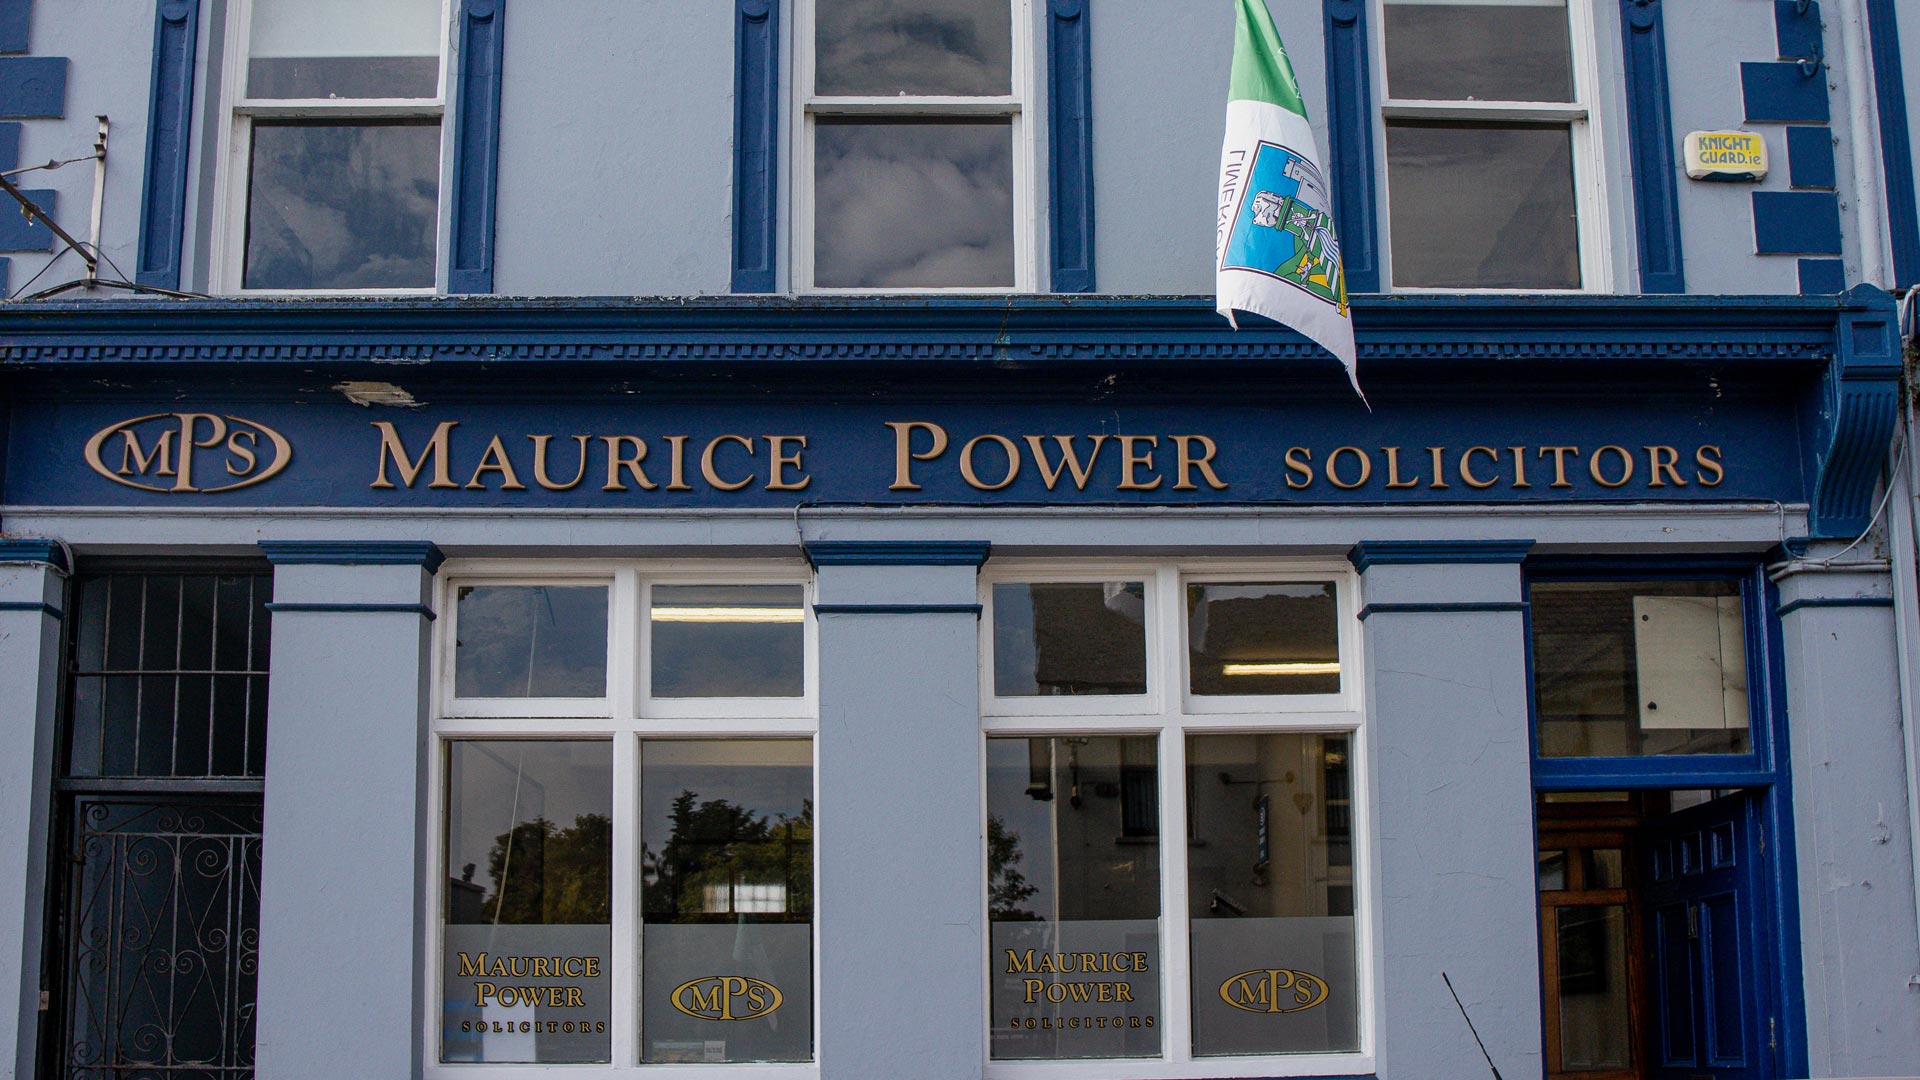 Maurice Power Solicitors premises on Lord Edward Street, Limerick